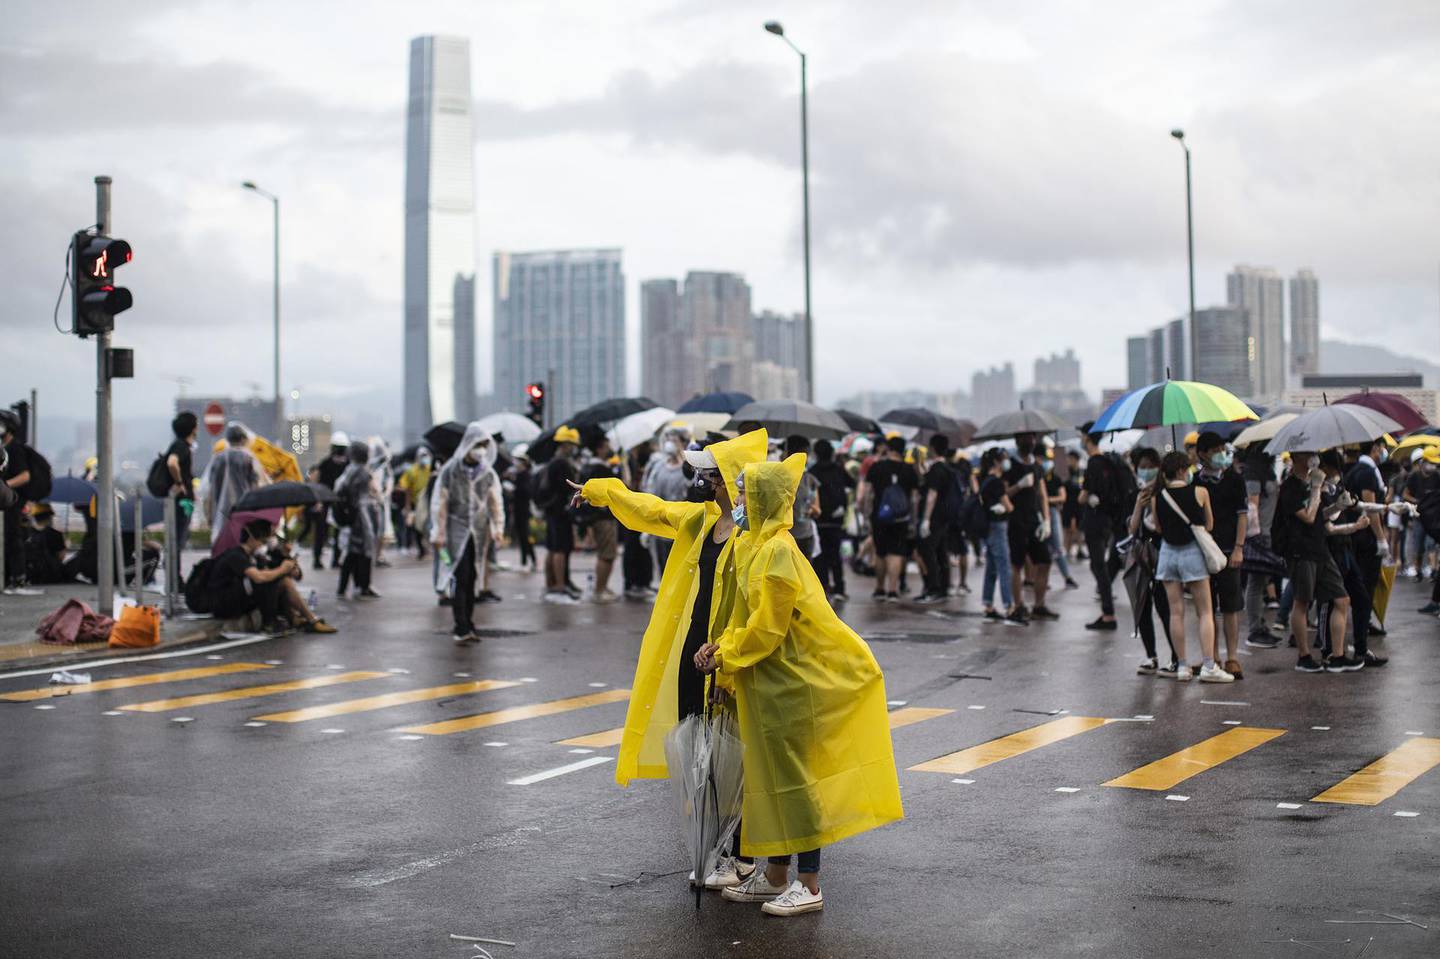 Demonstrators wear yellow raincoats as others gather on Lung Wo Road near the Central Government Complex during a protest in Hong Kong, China, on Monday, July 1, 2019. Hong Kong police clashed with black-clad protesters in a fresh sign of unrest as the city's China-backed chief executive promised to be more open and inclusive at the turbulent start of her third year in office. Photographer: Justin Chin/Bloomberg